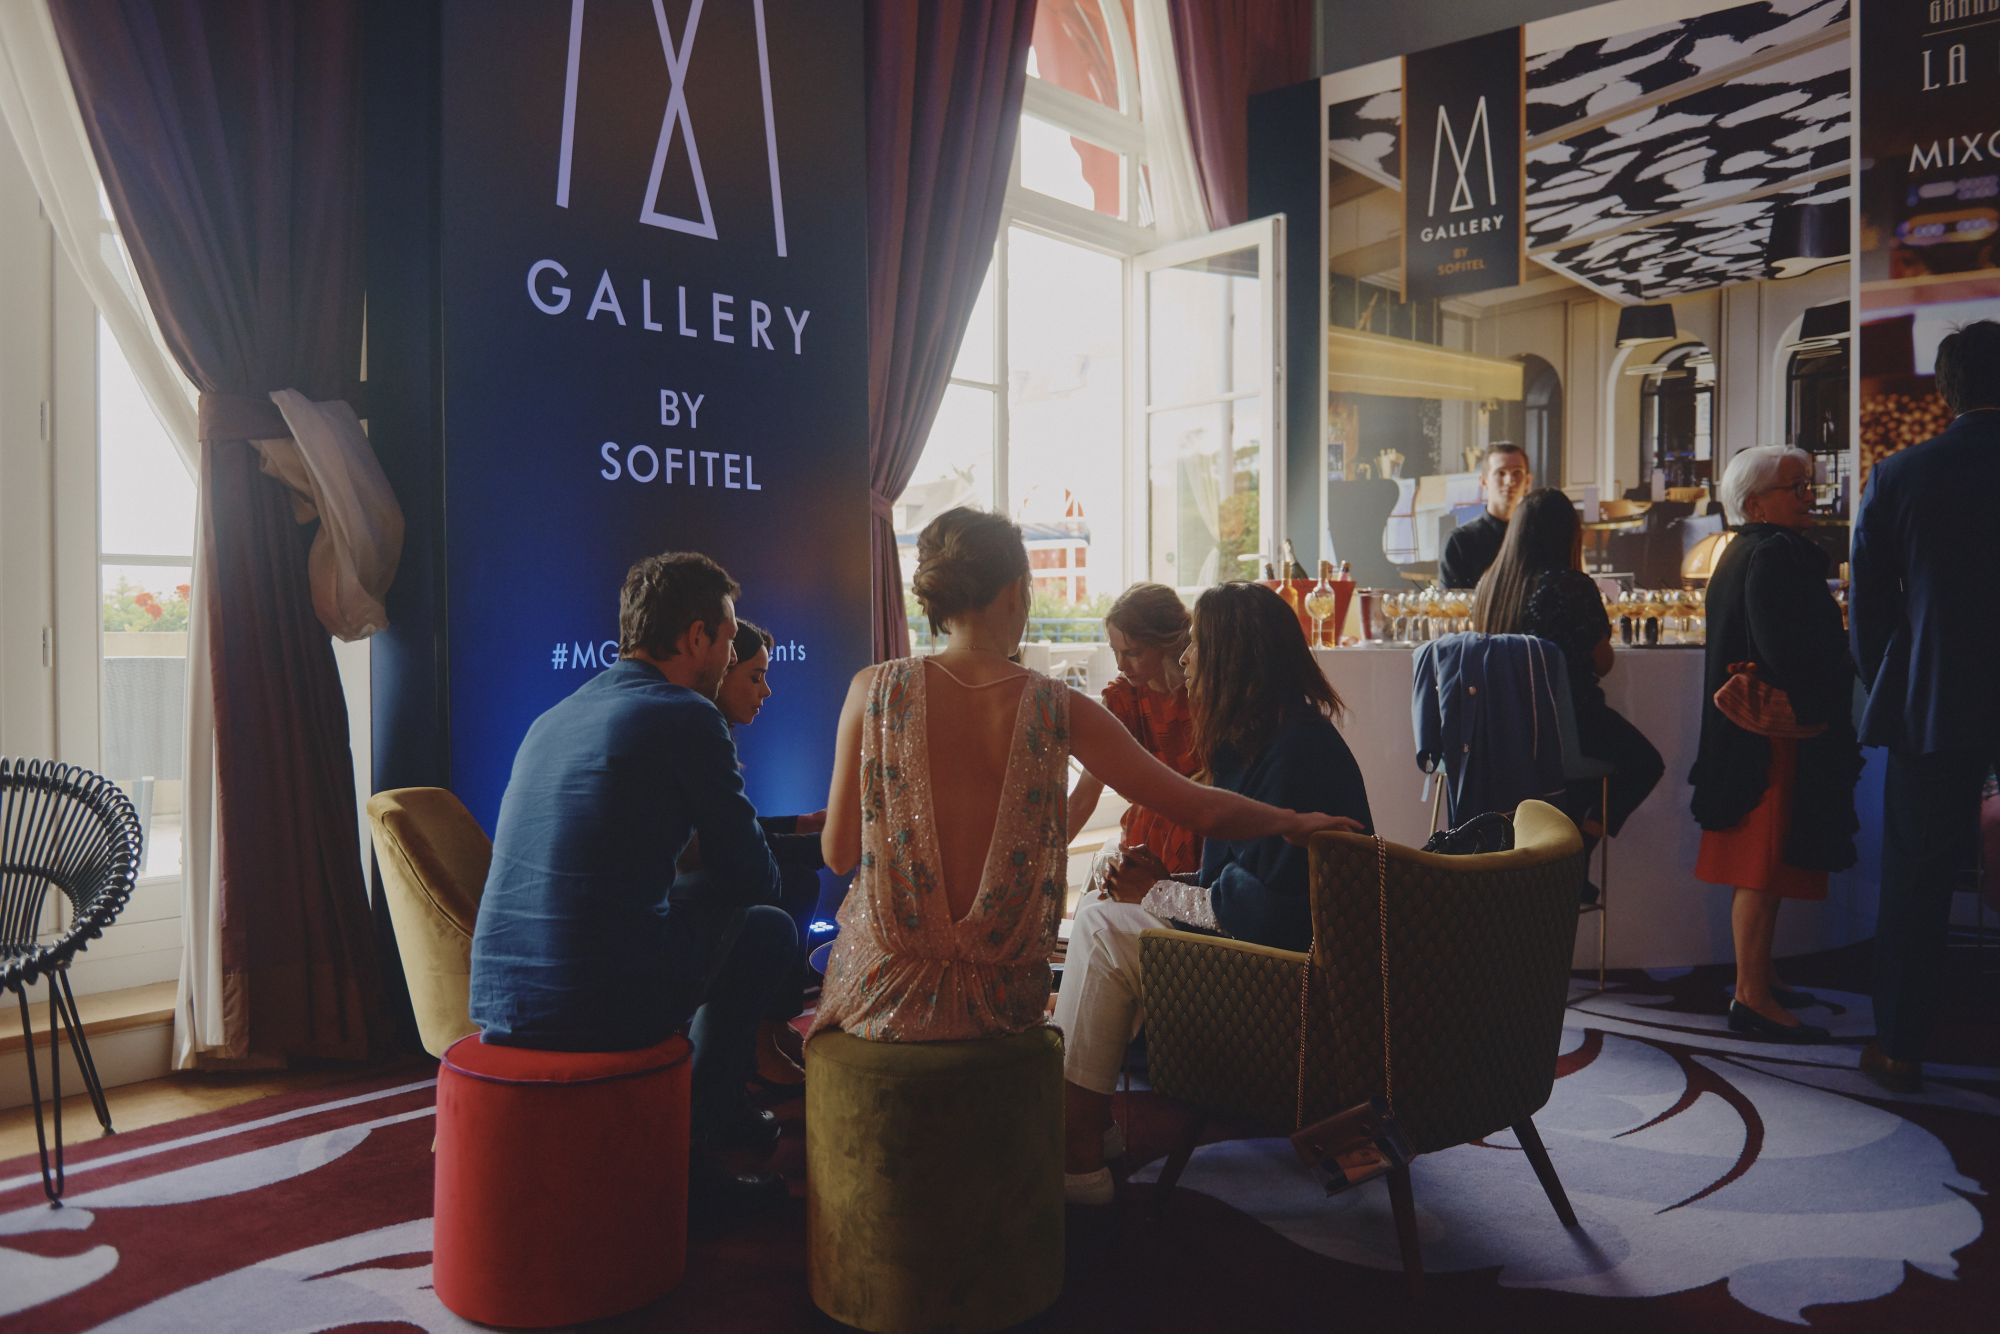 Le Grand Hôtel Cabourg
*Sofitel Le Grand Hôtel Cabourg - MGallery by Sofitel*